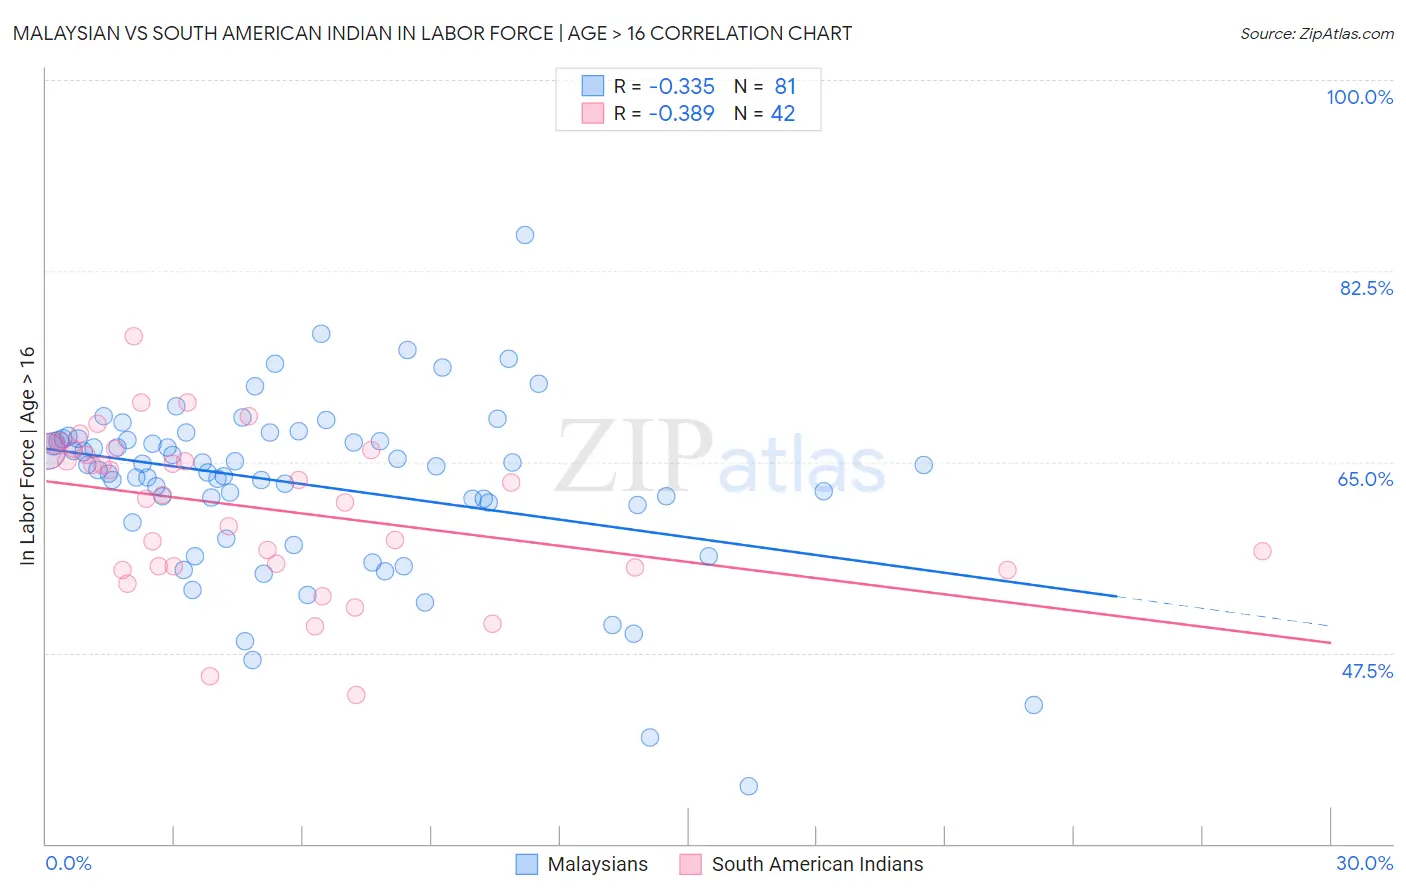 Malaysian vs South American Indian In Labor Force | Age > 16